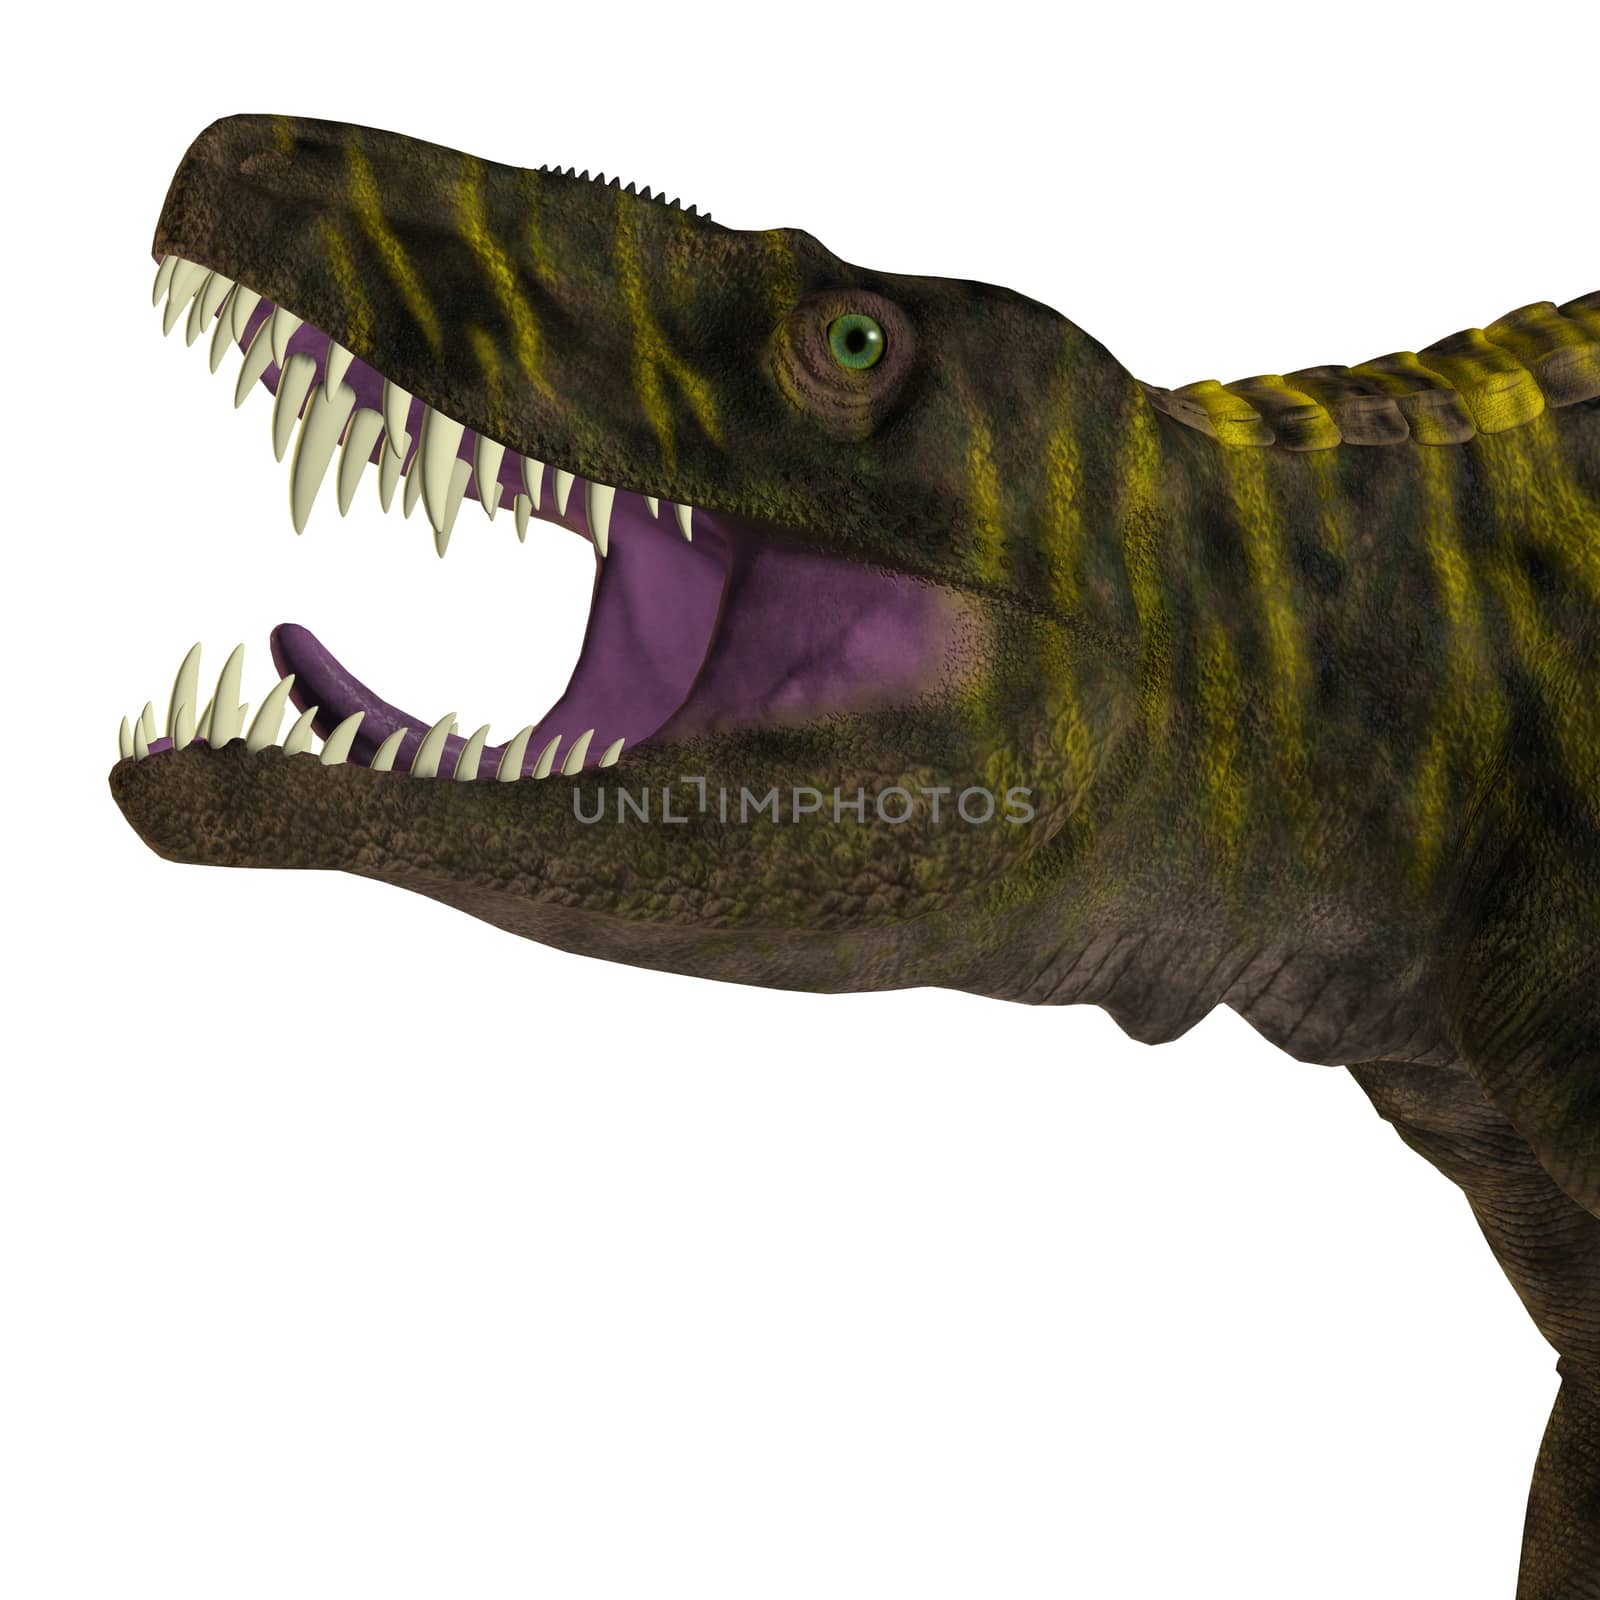 Batrachotomus was a carnivorous archosaur predator that lived in Germany during the Triassic Period.